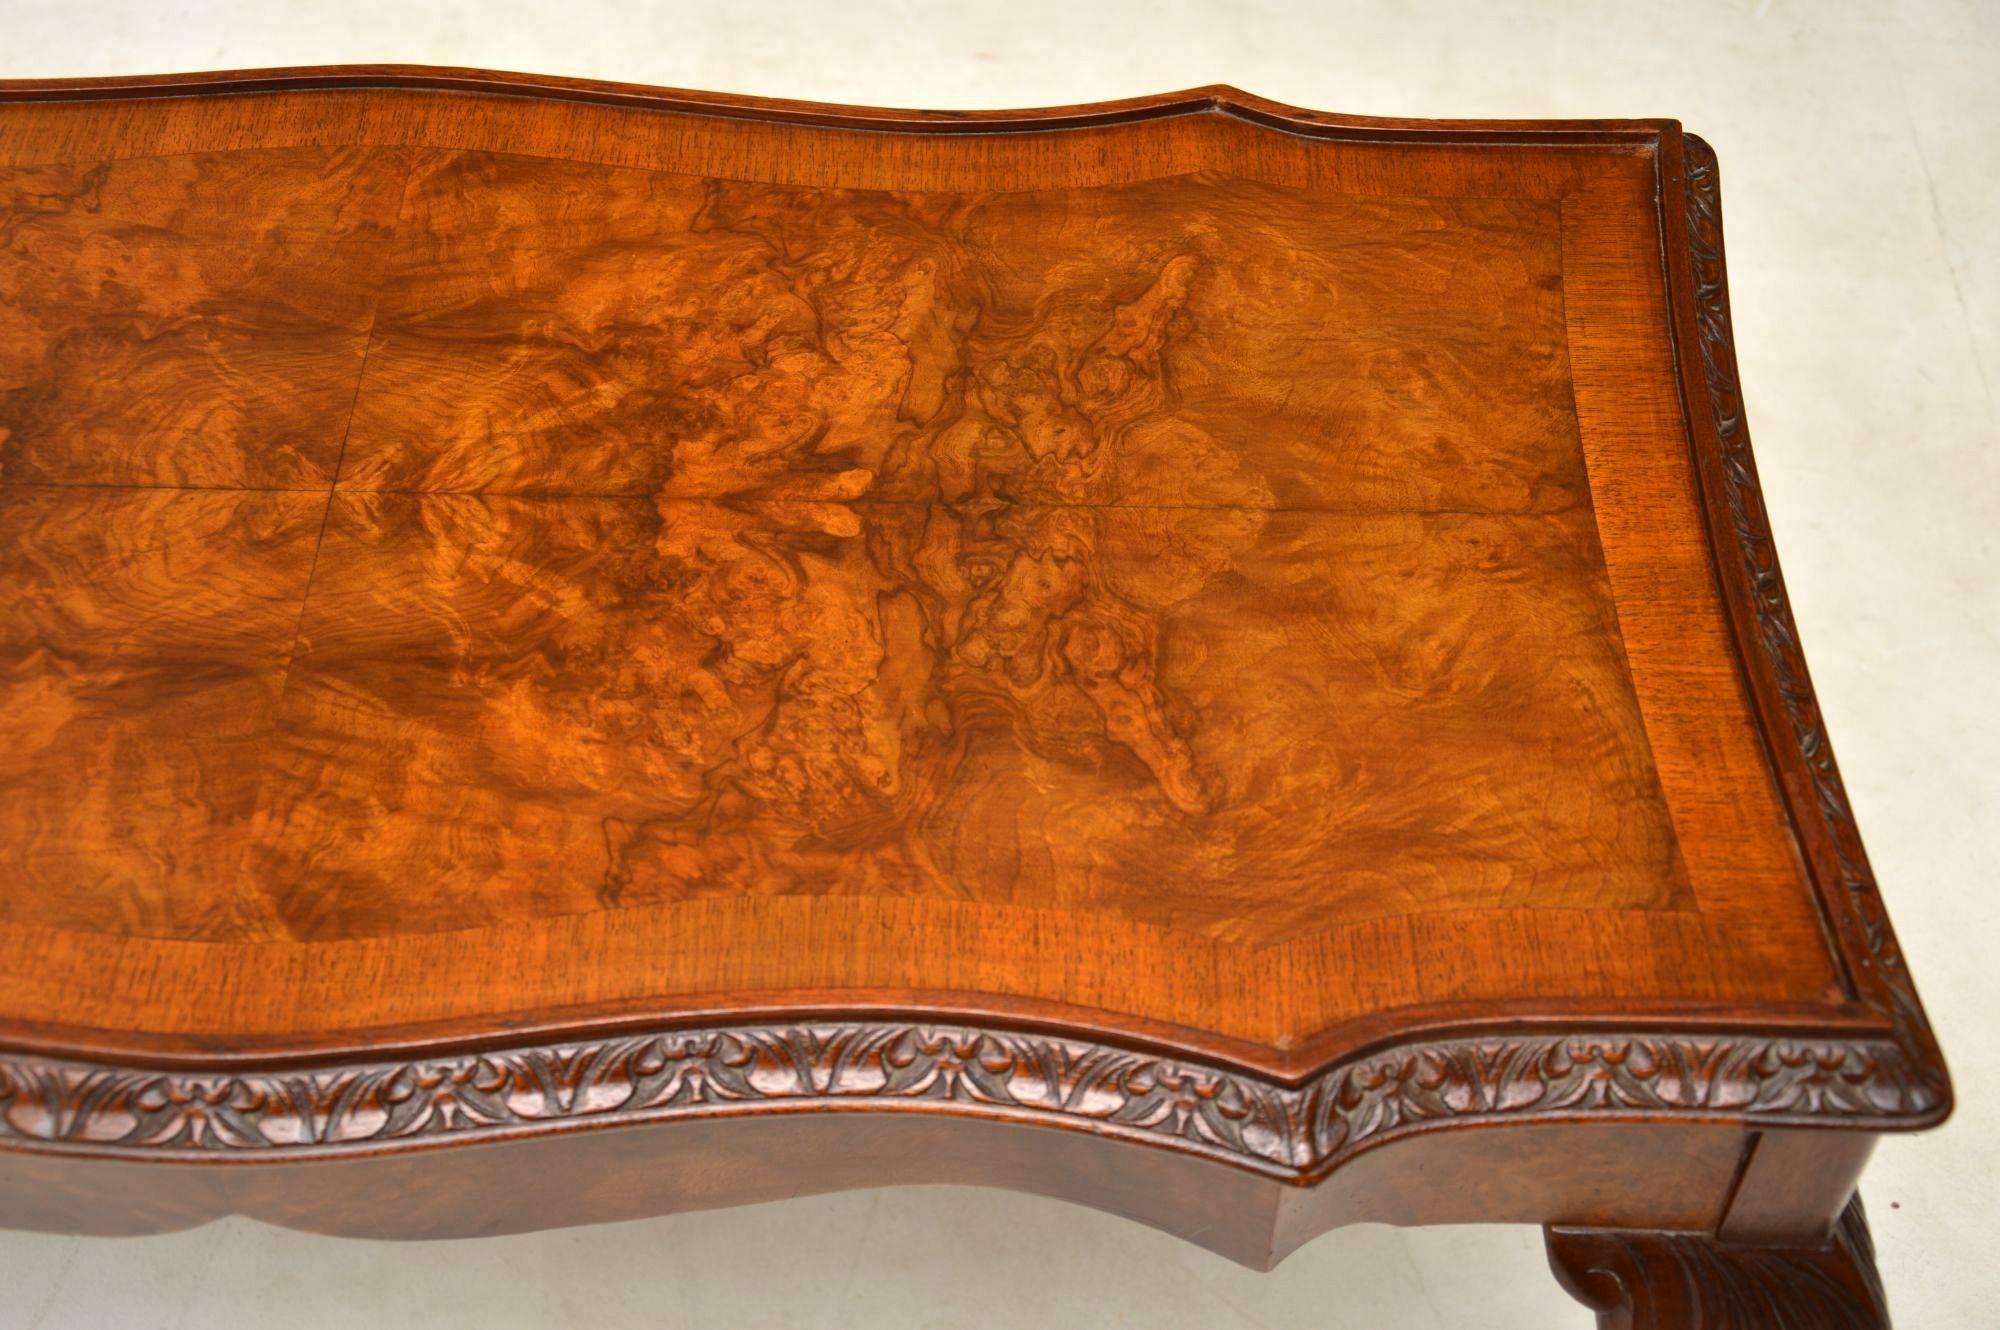 Early 20th Century Antique Burr Walnut Queen Anne Style Coffee Table